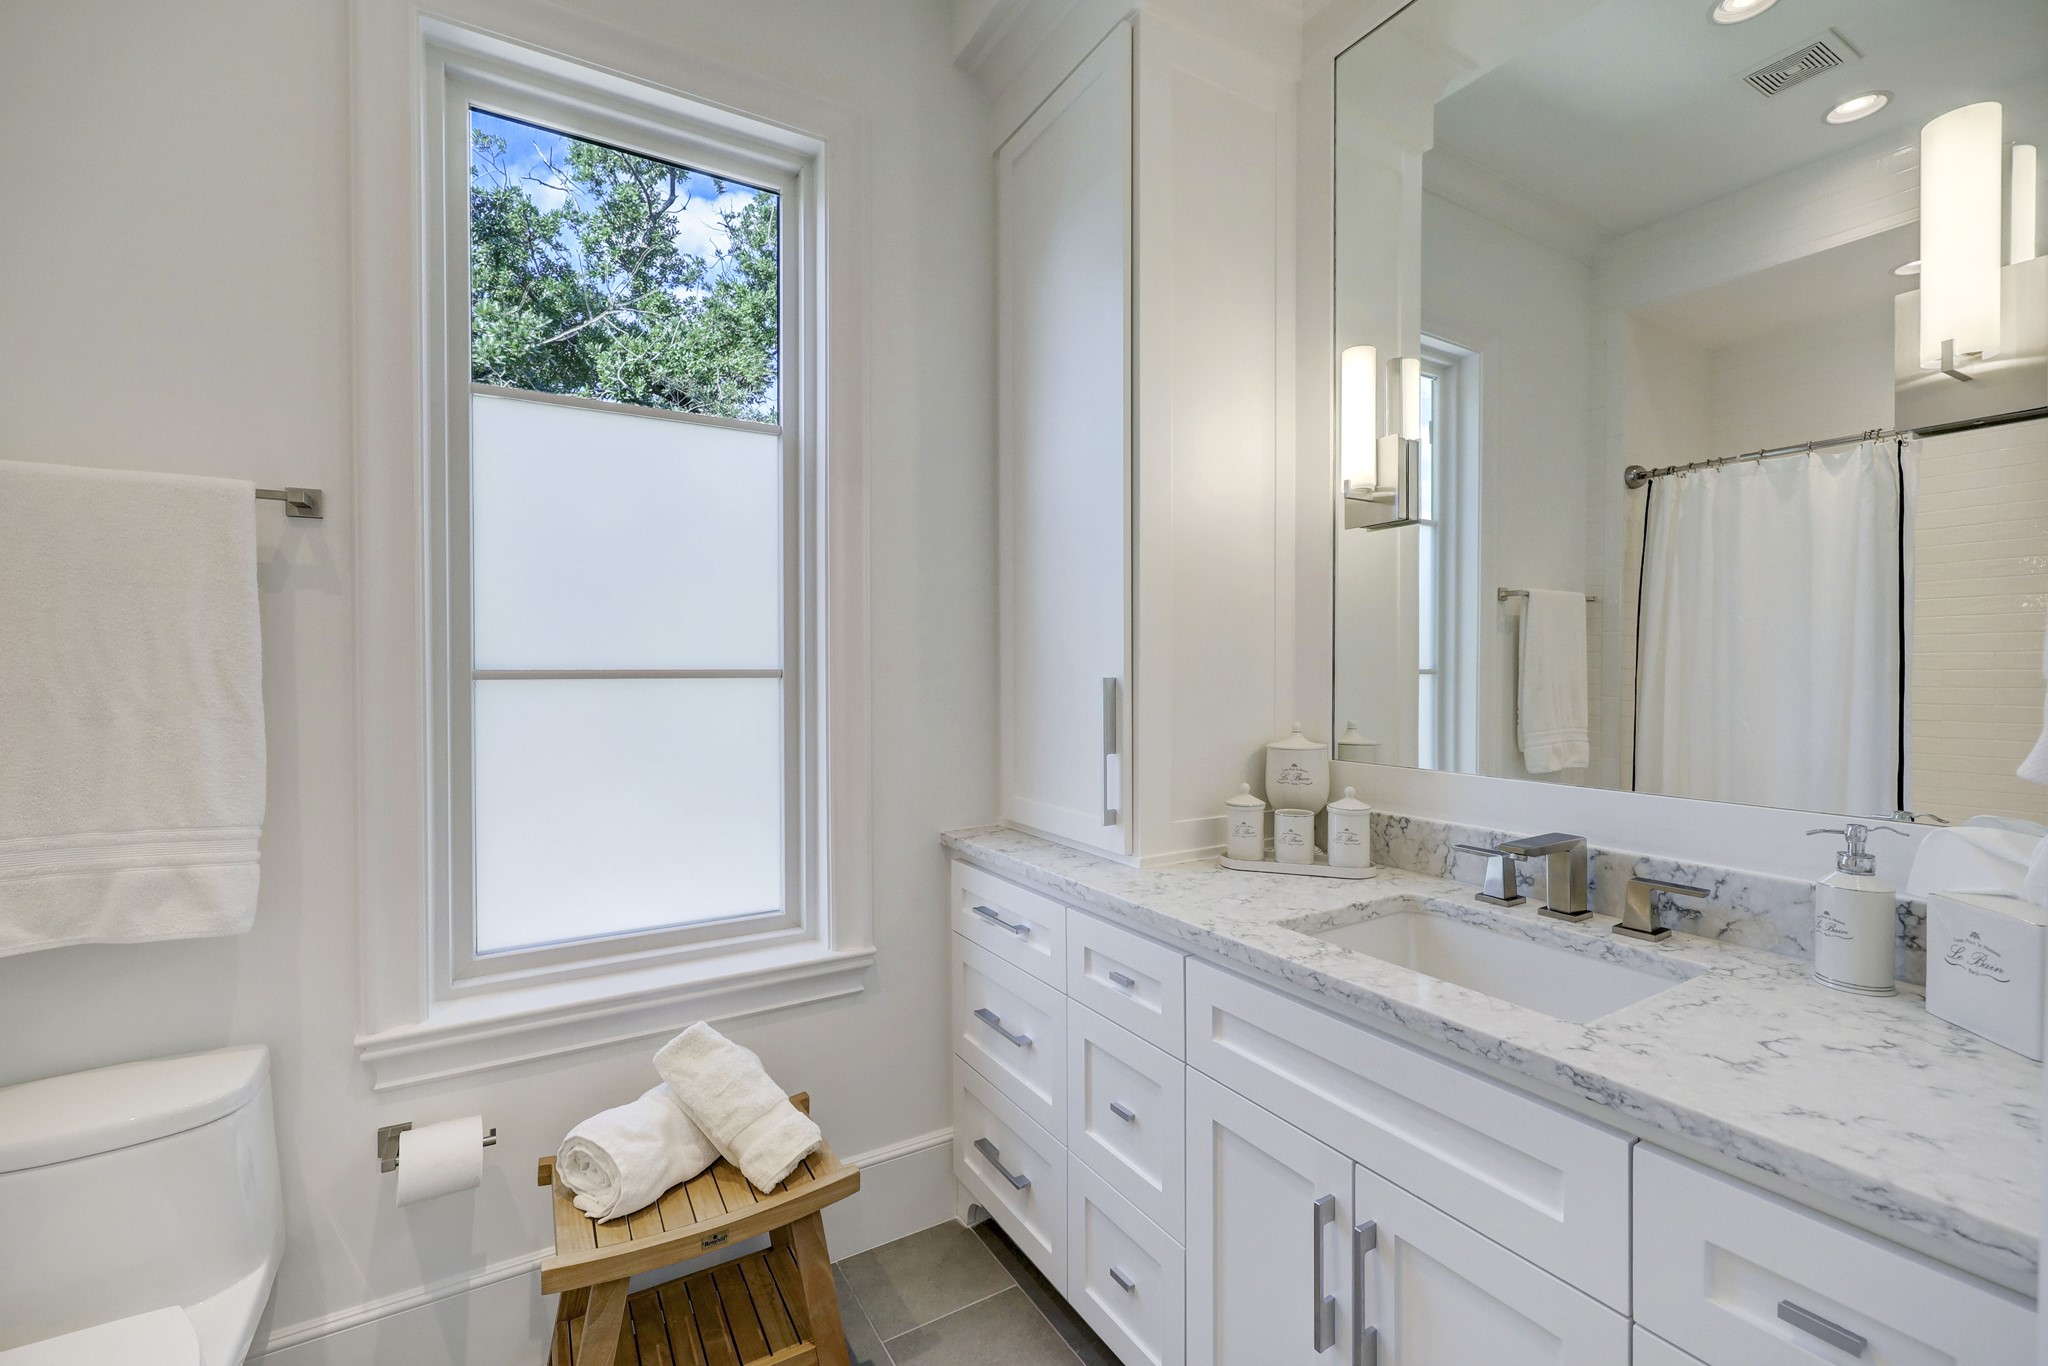 Quartz countertops, shower/tub combo, sconce lighting, and
plenty of storage space in this en-suite bath.